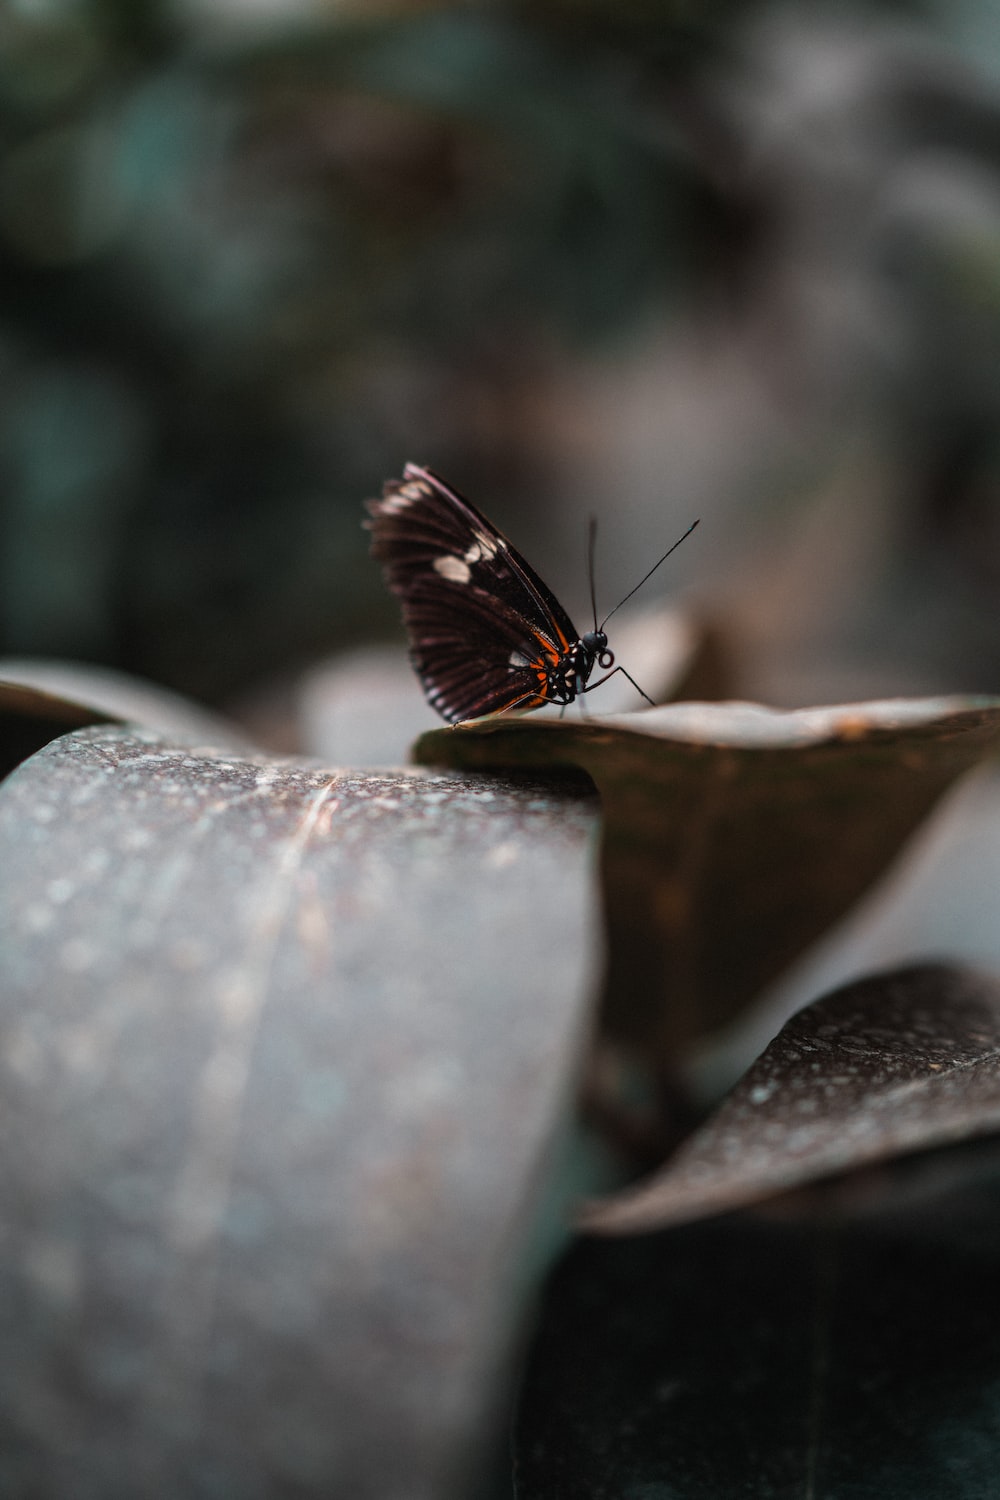 Butterfly Aesthetic Picture. Download Free Image